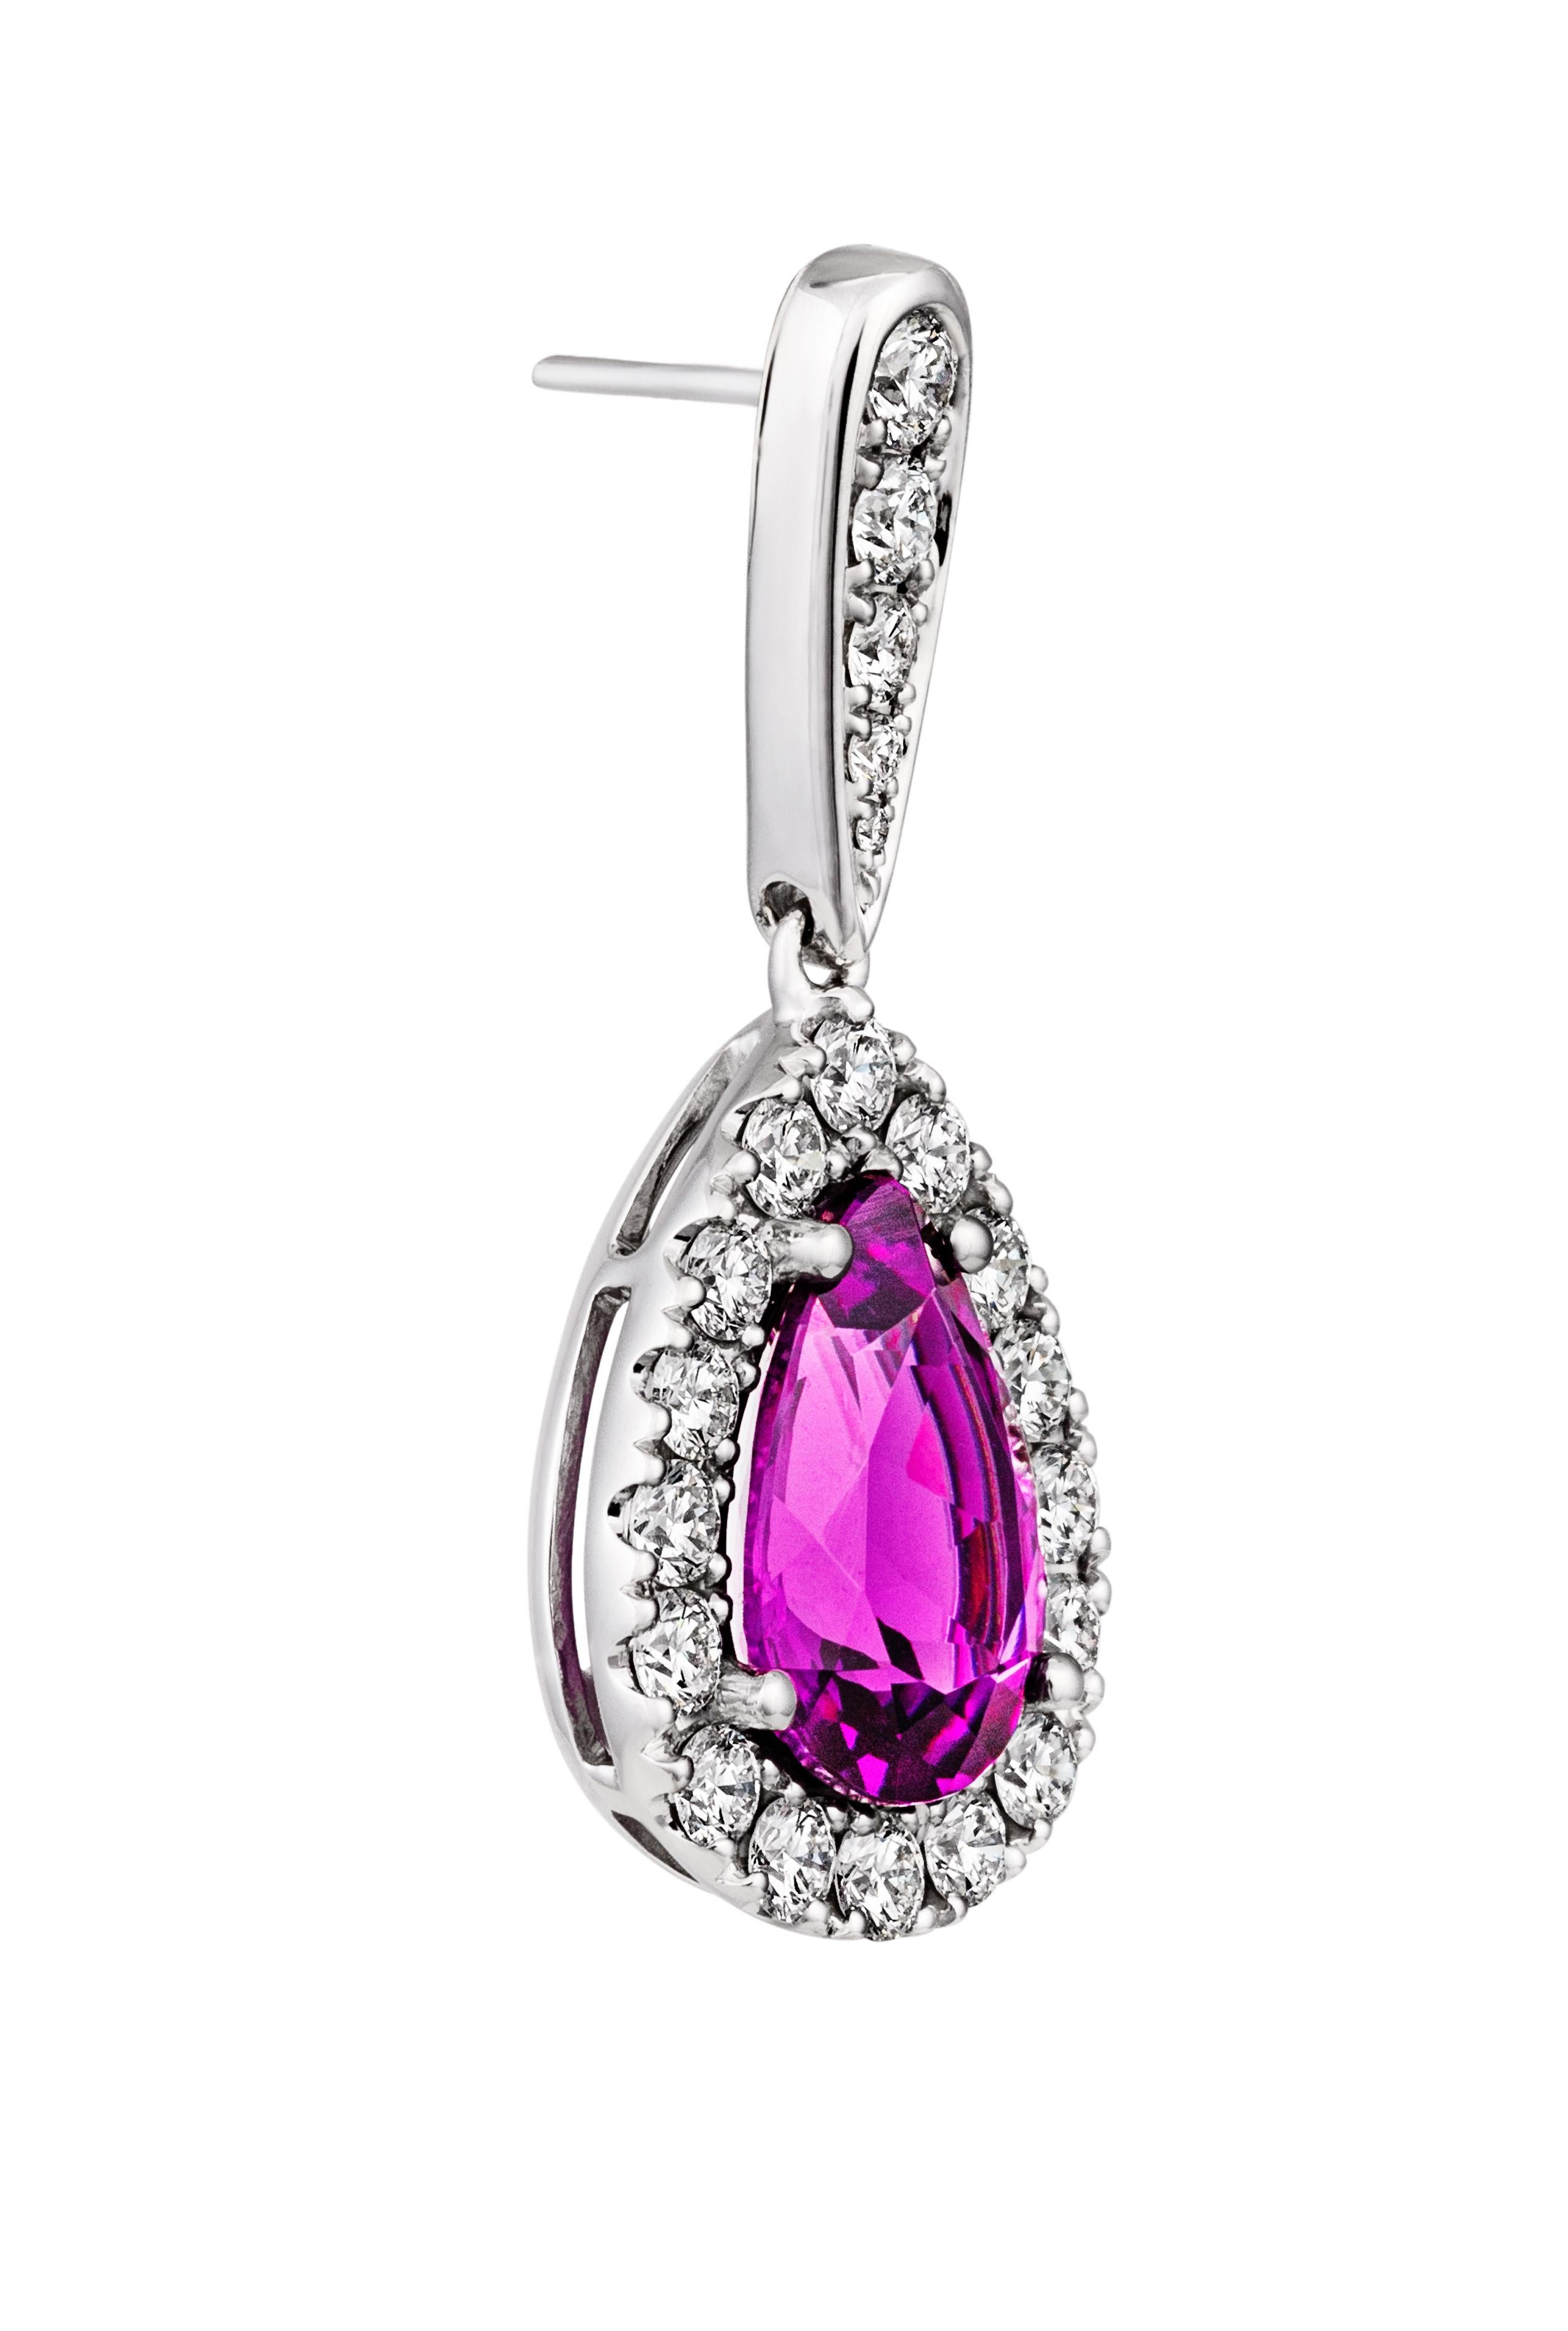 Beautiful 4.1cttw Pear-Shaped Amethyst surrounded by 1.19cttw Diamonds on 18kt White Gold Hooks. With a classic and timeless vintage-inspired design, these earrings will make you feel like you're a royal in the Renaissance Age. Only one pair